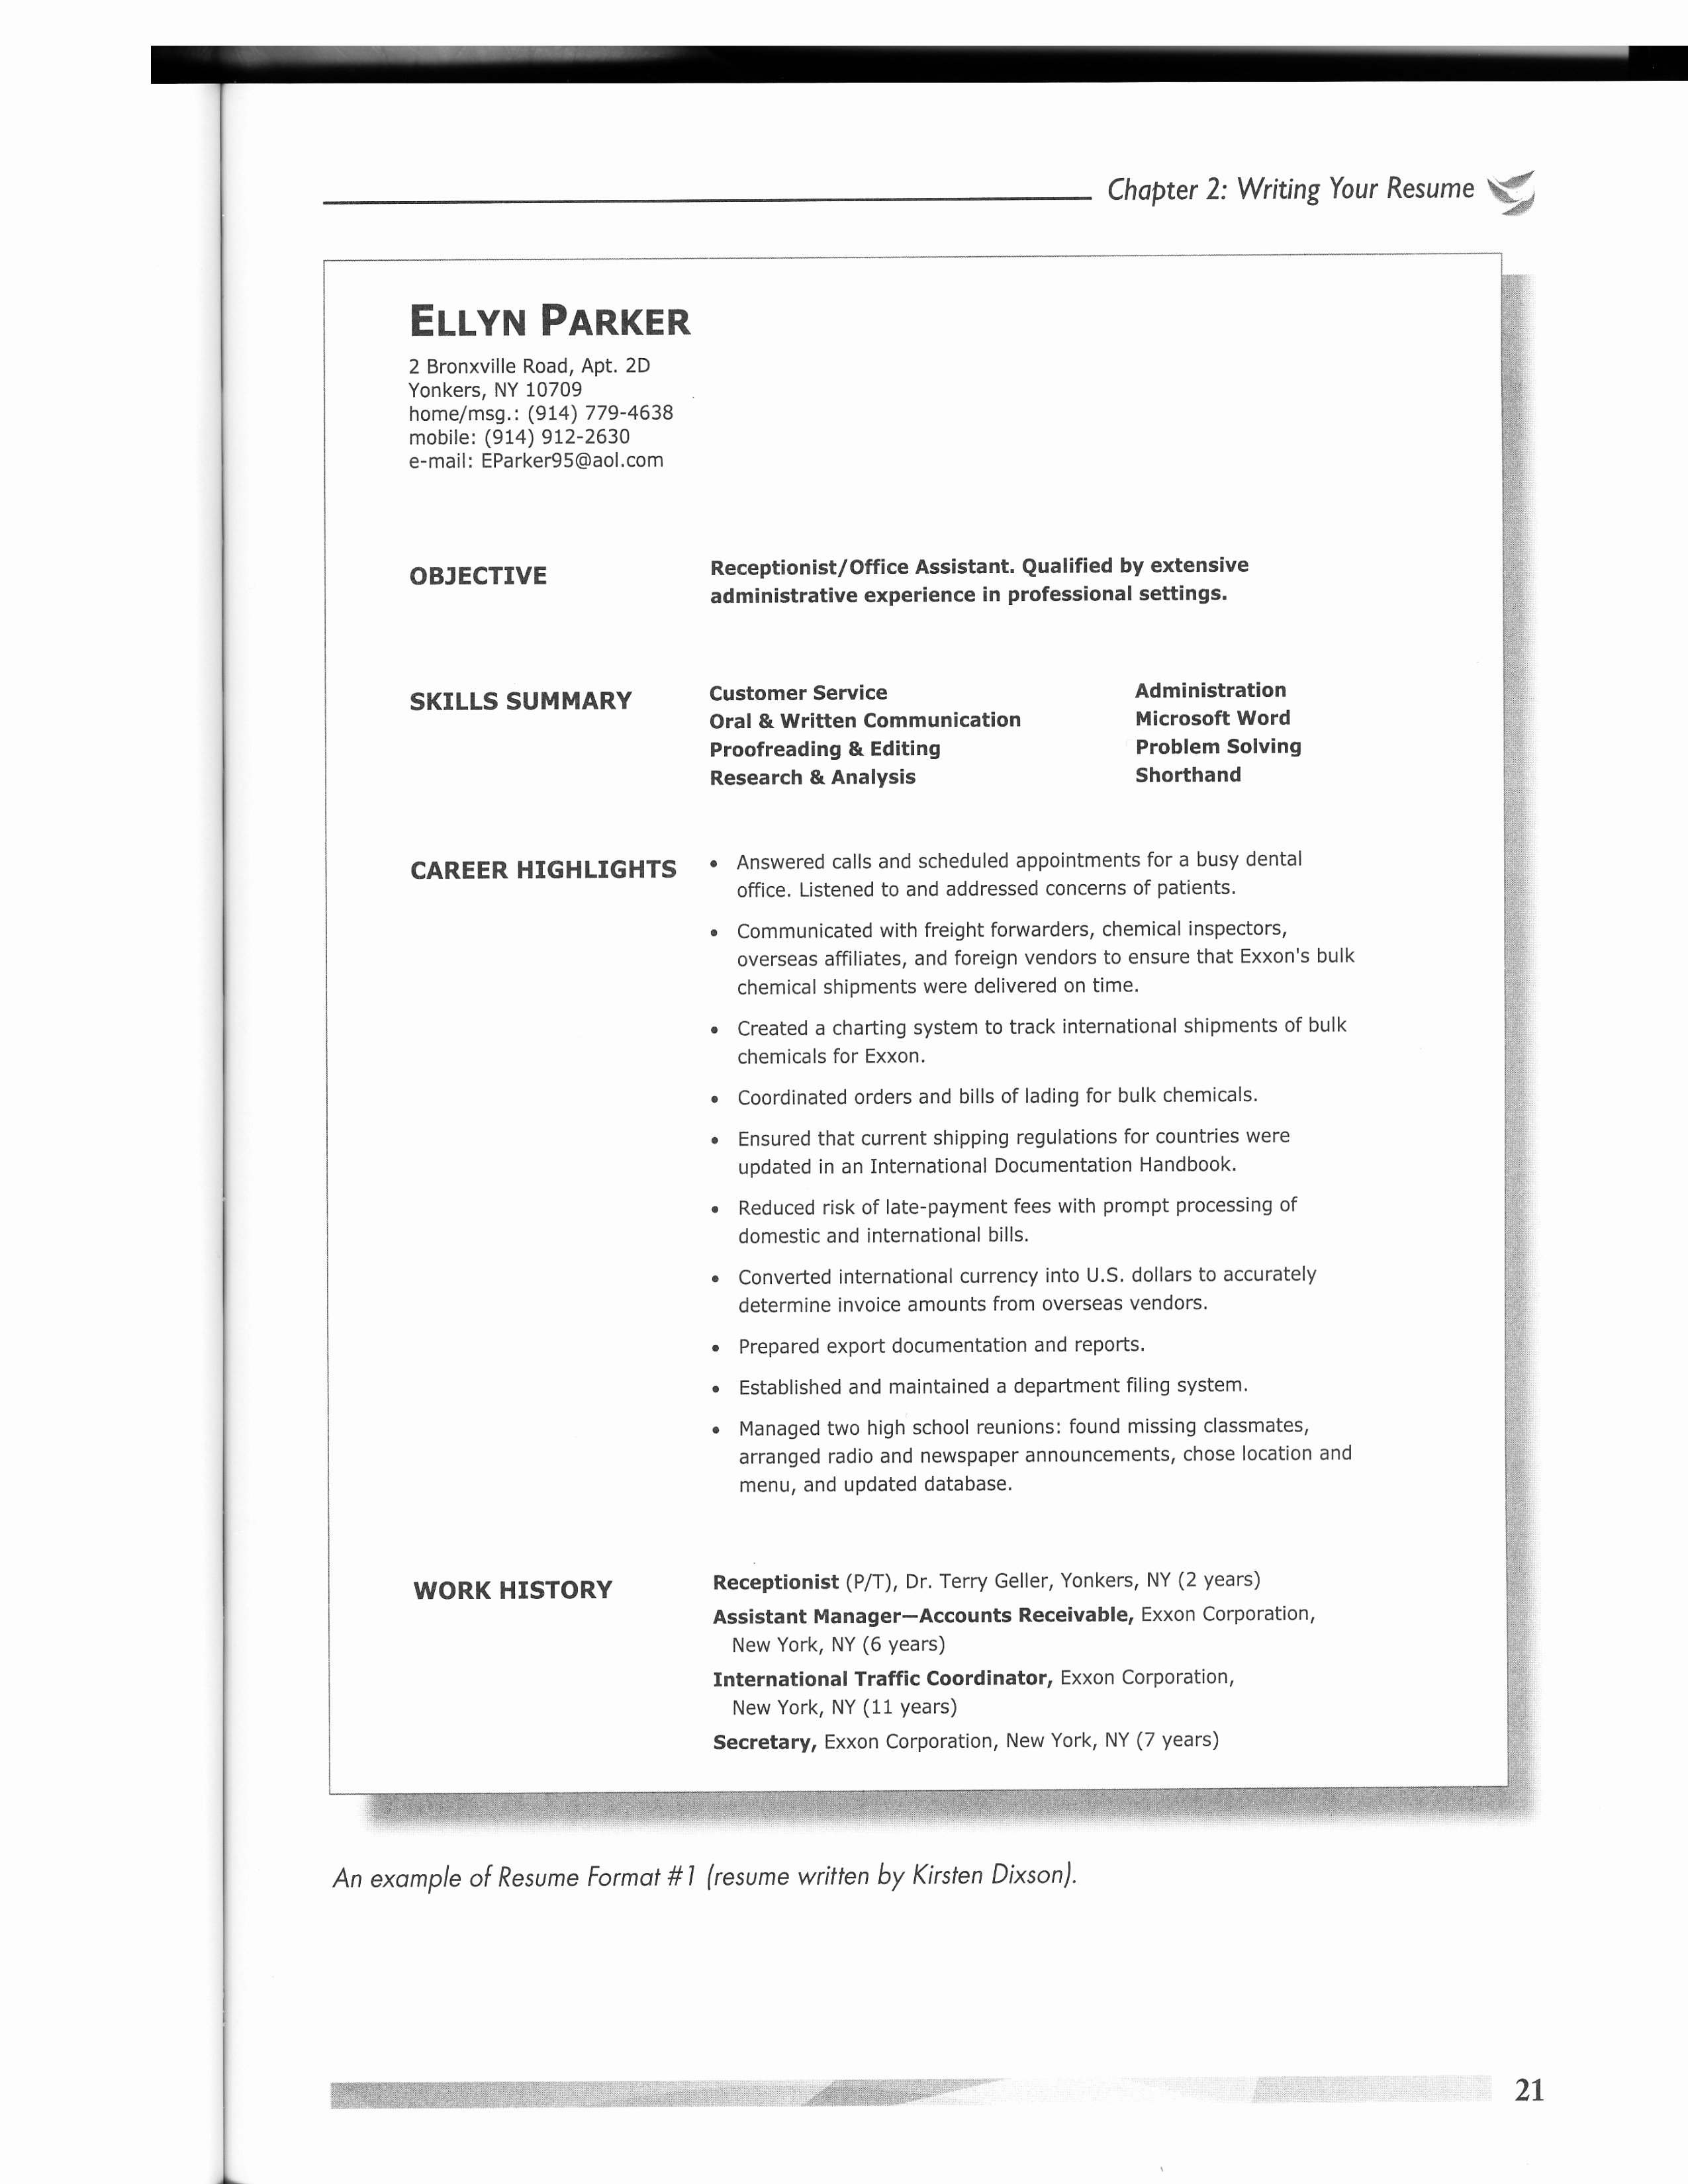 Download Resume formats &amp; Write the Best Resume